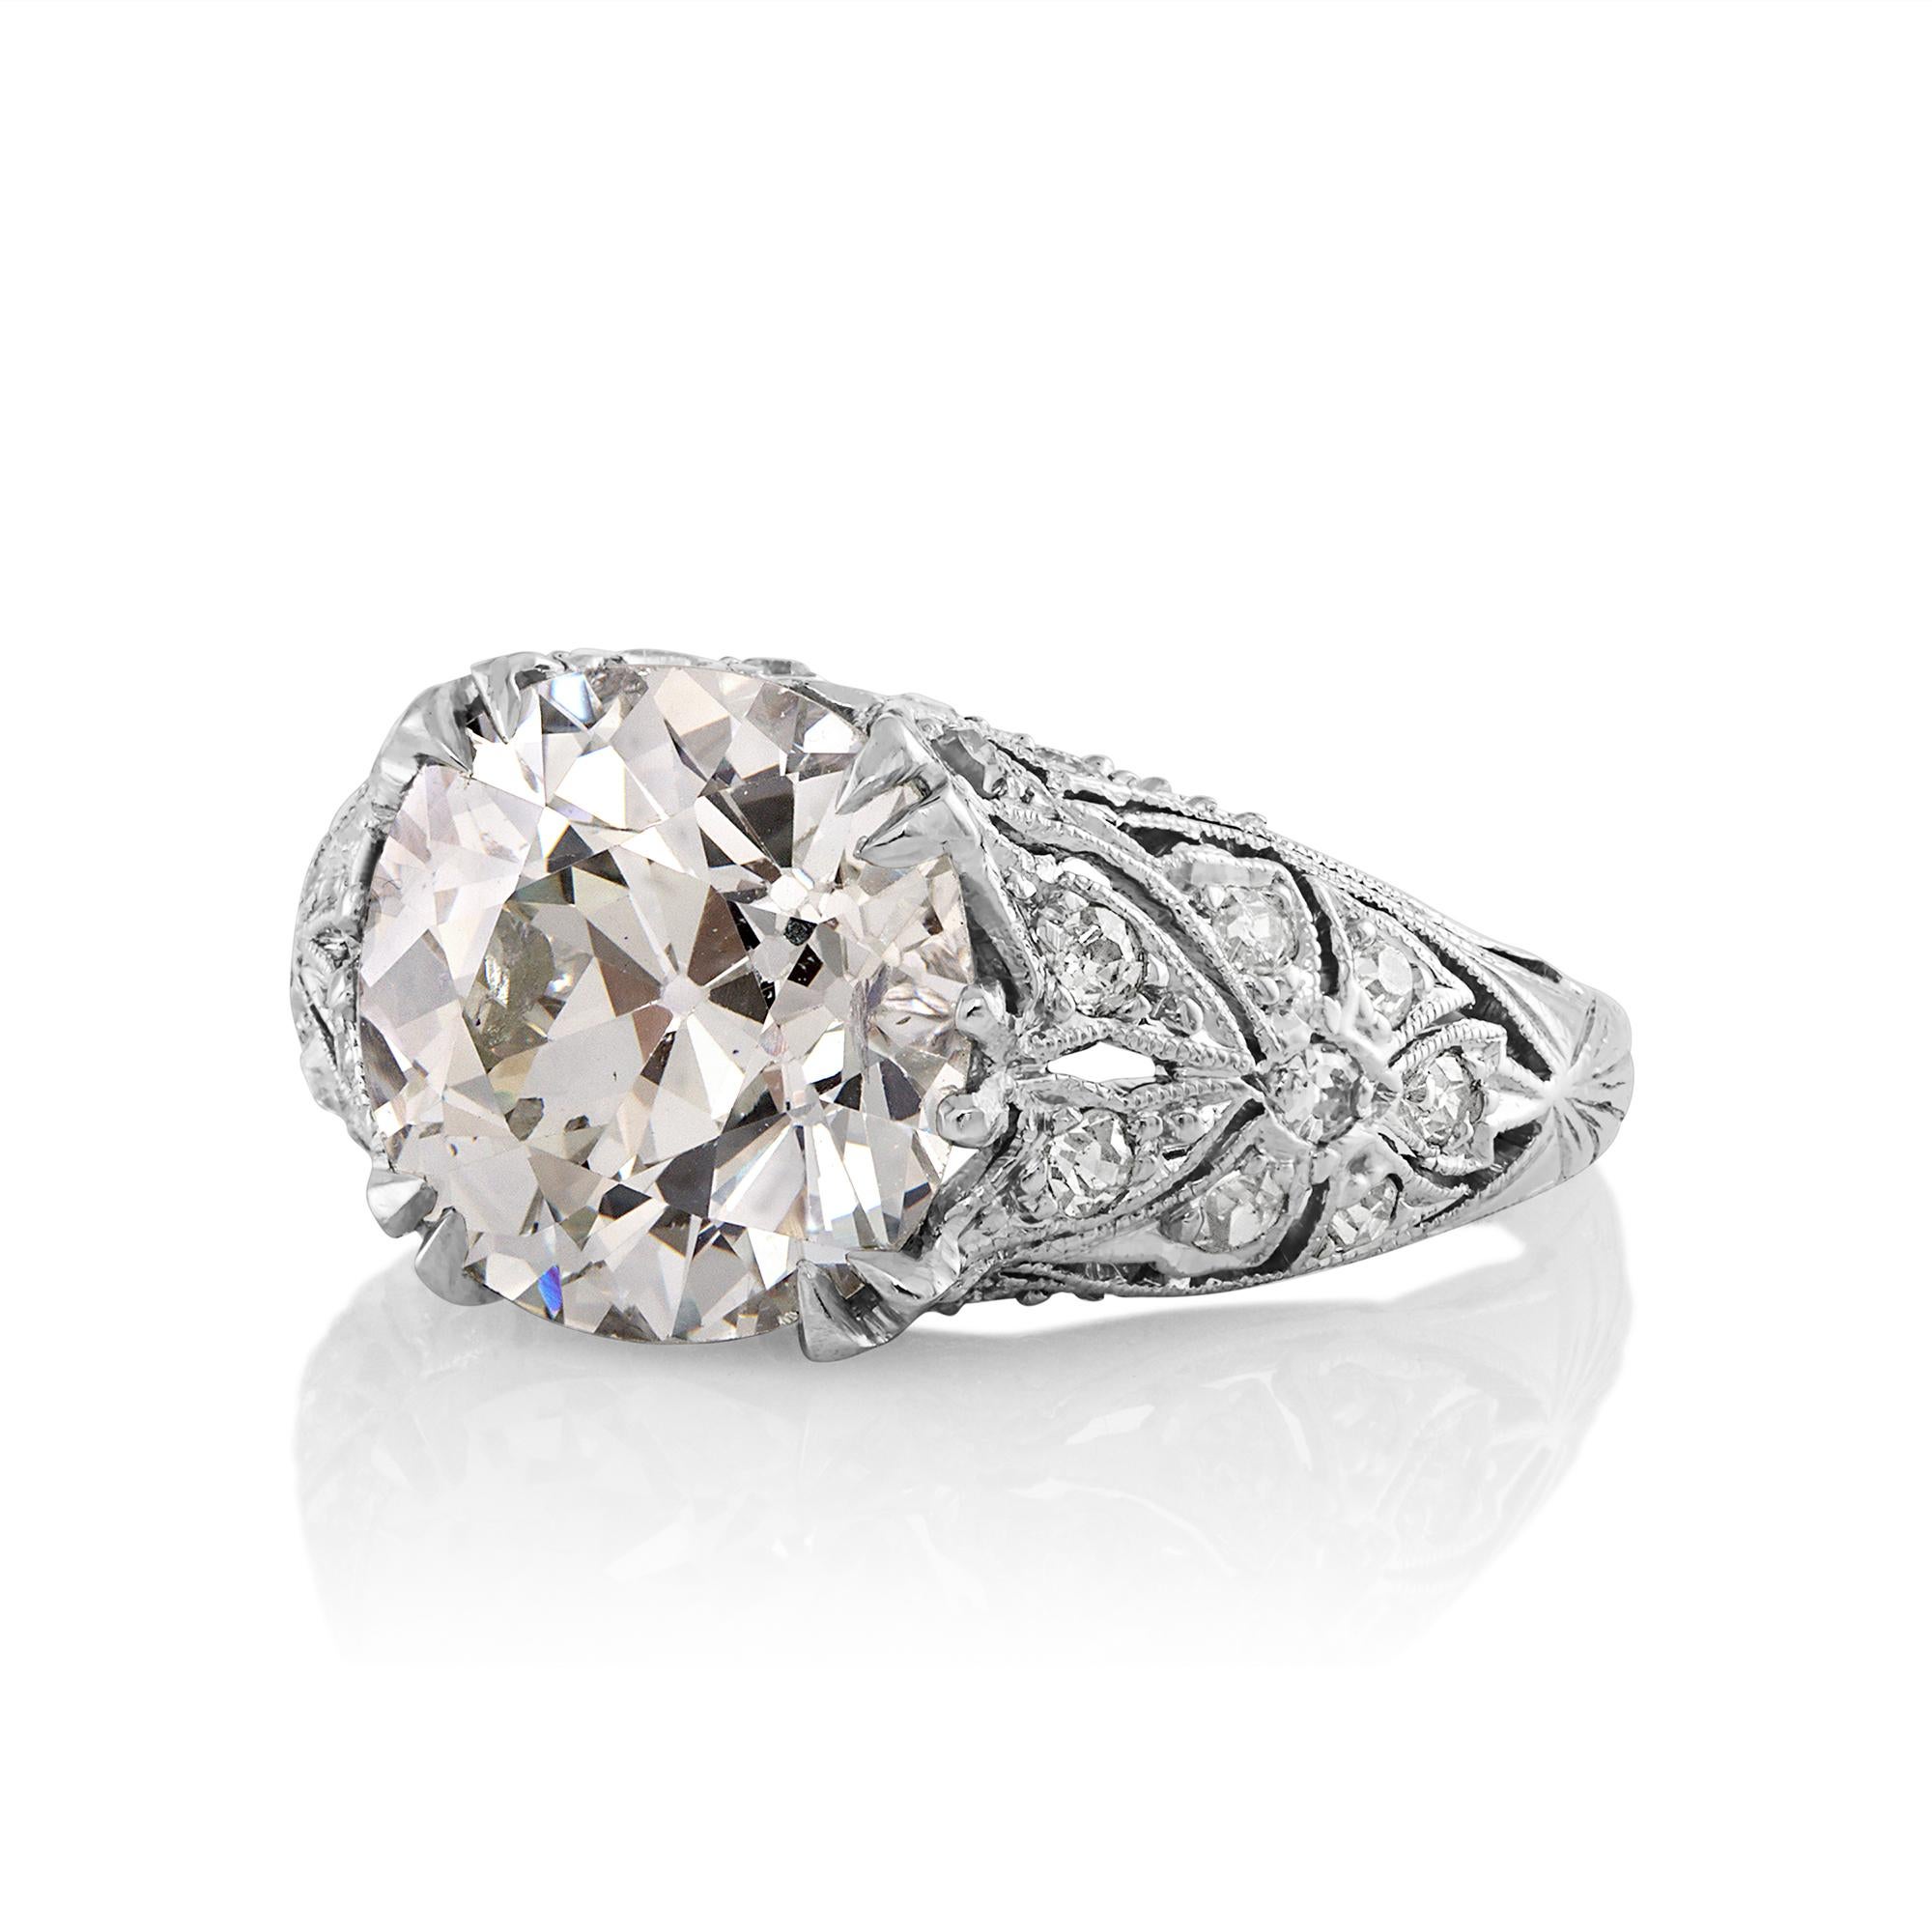 Edwardian GIA Shy 4.0ctw OLD EUROPEAN Diamond Engagement Antique Platinum Ring

Edwardian Rings represent some of the finest examples of diamond, platinum jewelry in existence. Edwardian Diamond jewels were made to look as light and delicate as